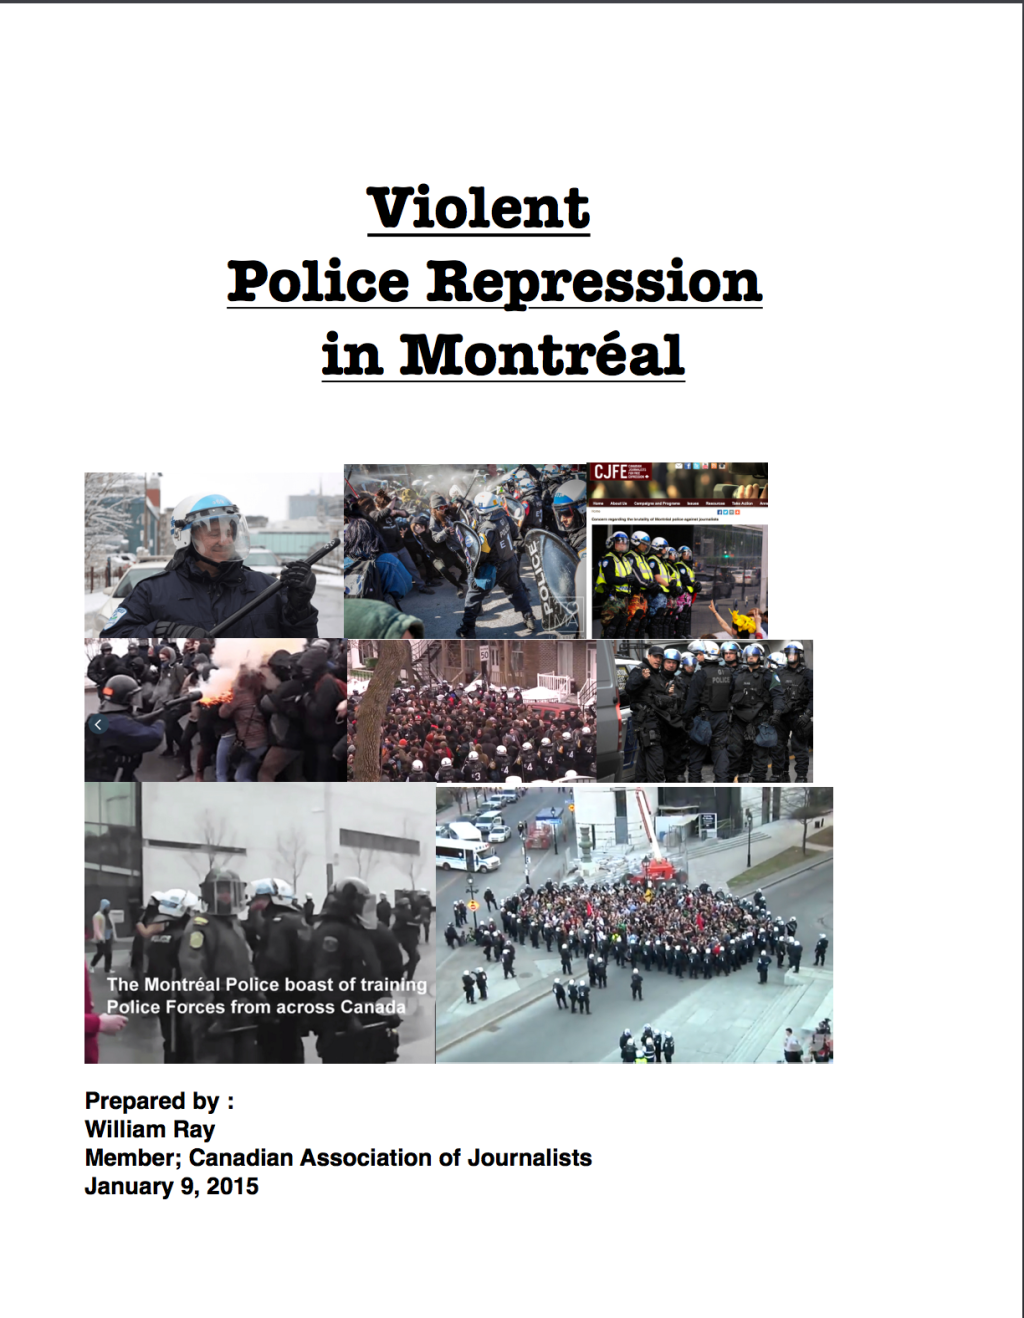 Violent Police Repression of Media in Montréal, business as usual